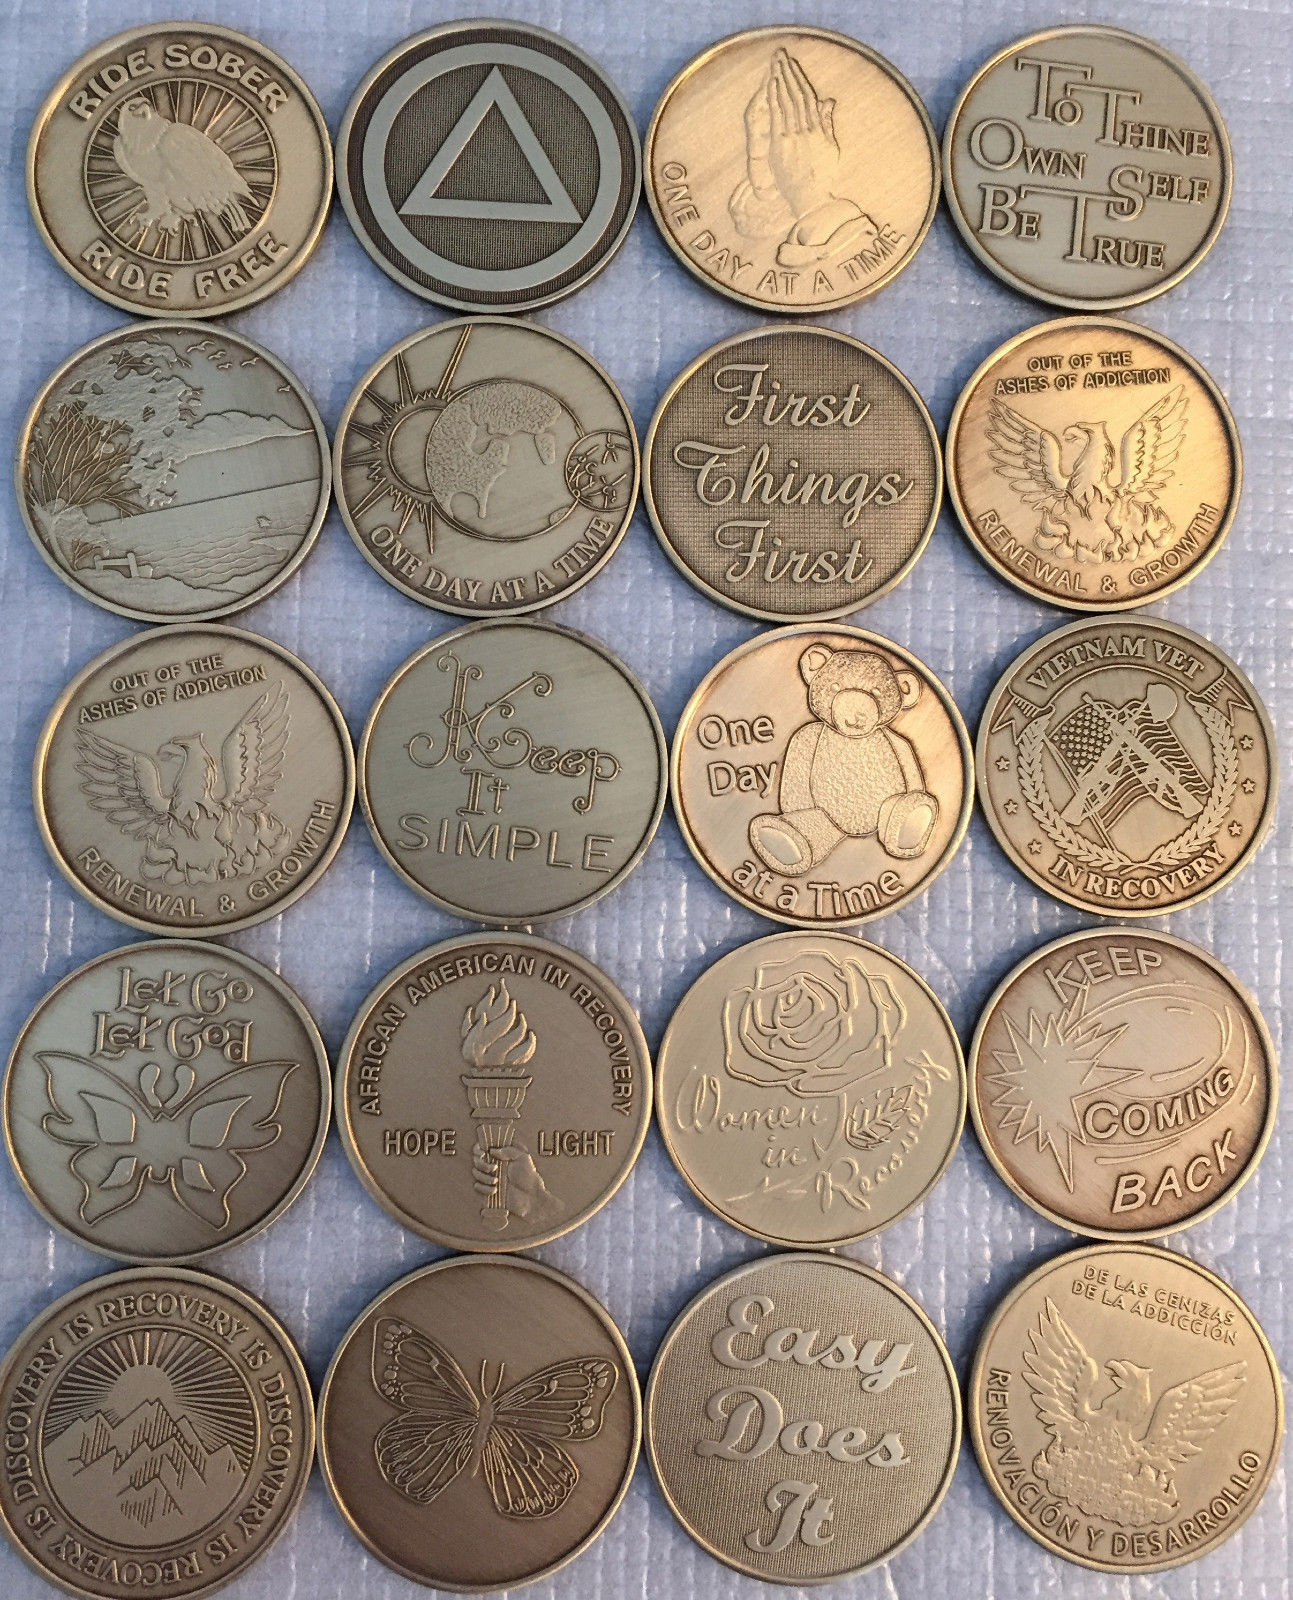 Lot of 30 Serenity Prayer Bronze Medallions AA Alcoholics Anonymous Chip Coins